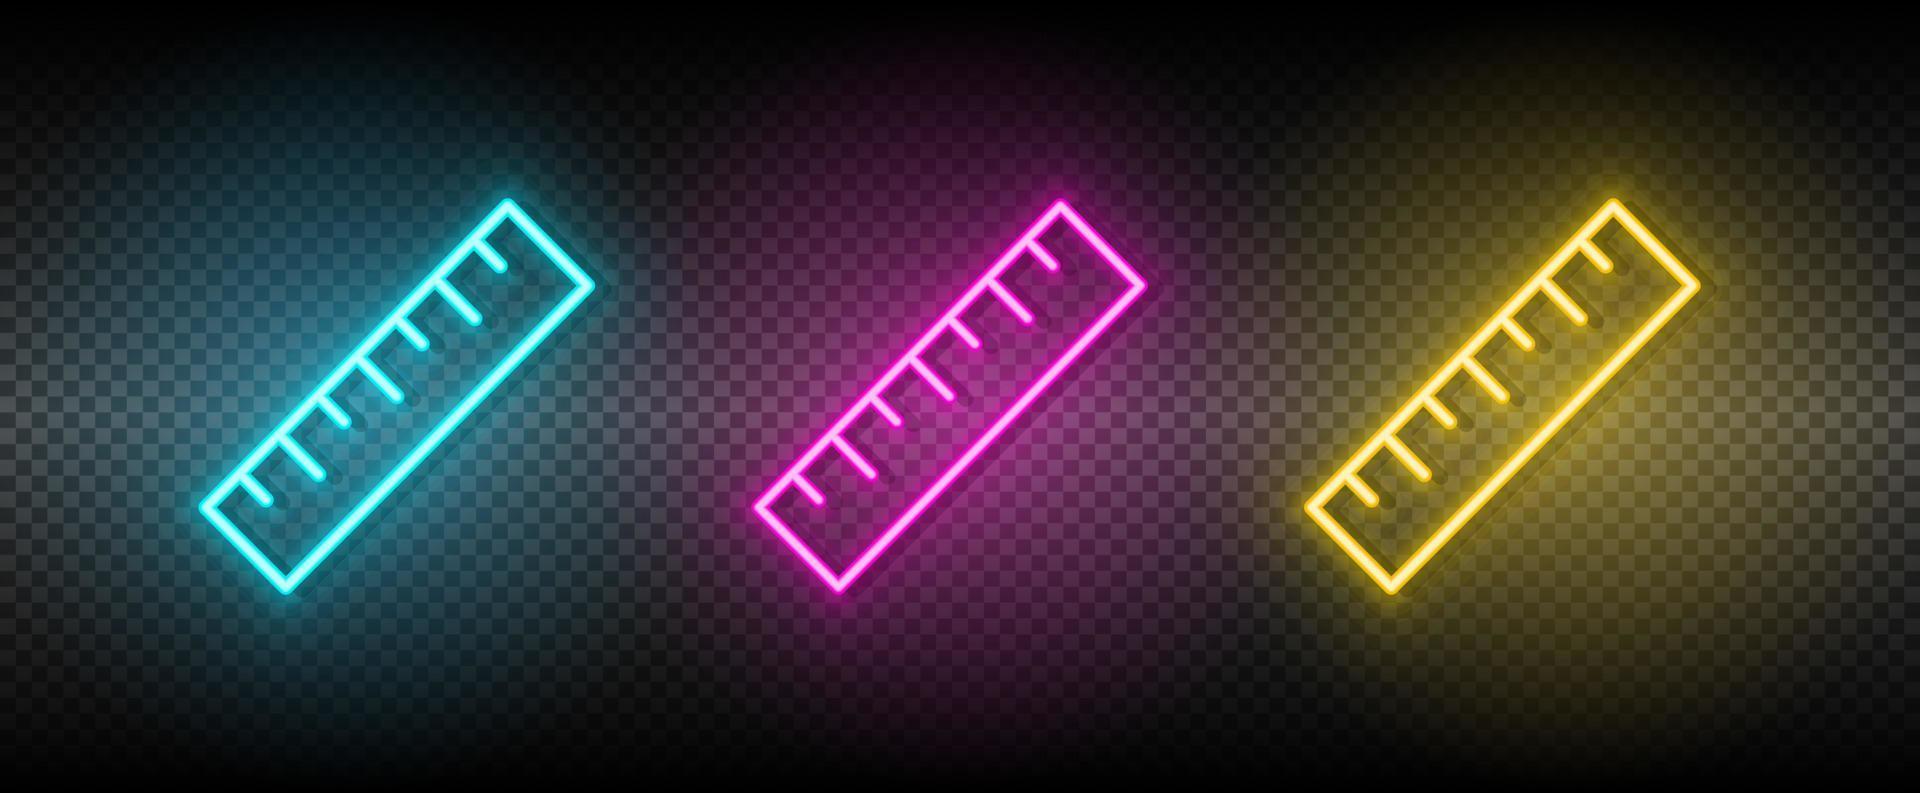 measure, ruler vector icon yellow, pink, blue neon set. Tools vector icon on dark background